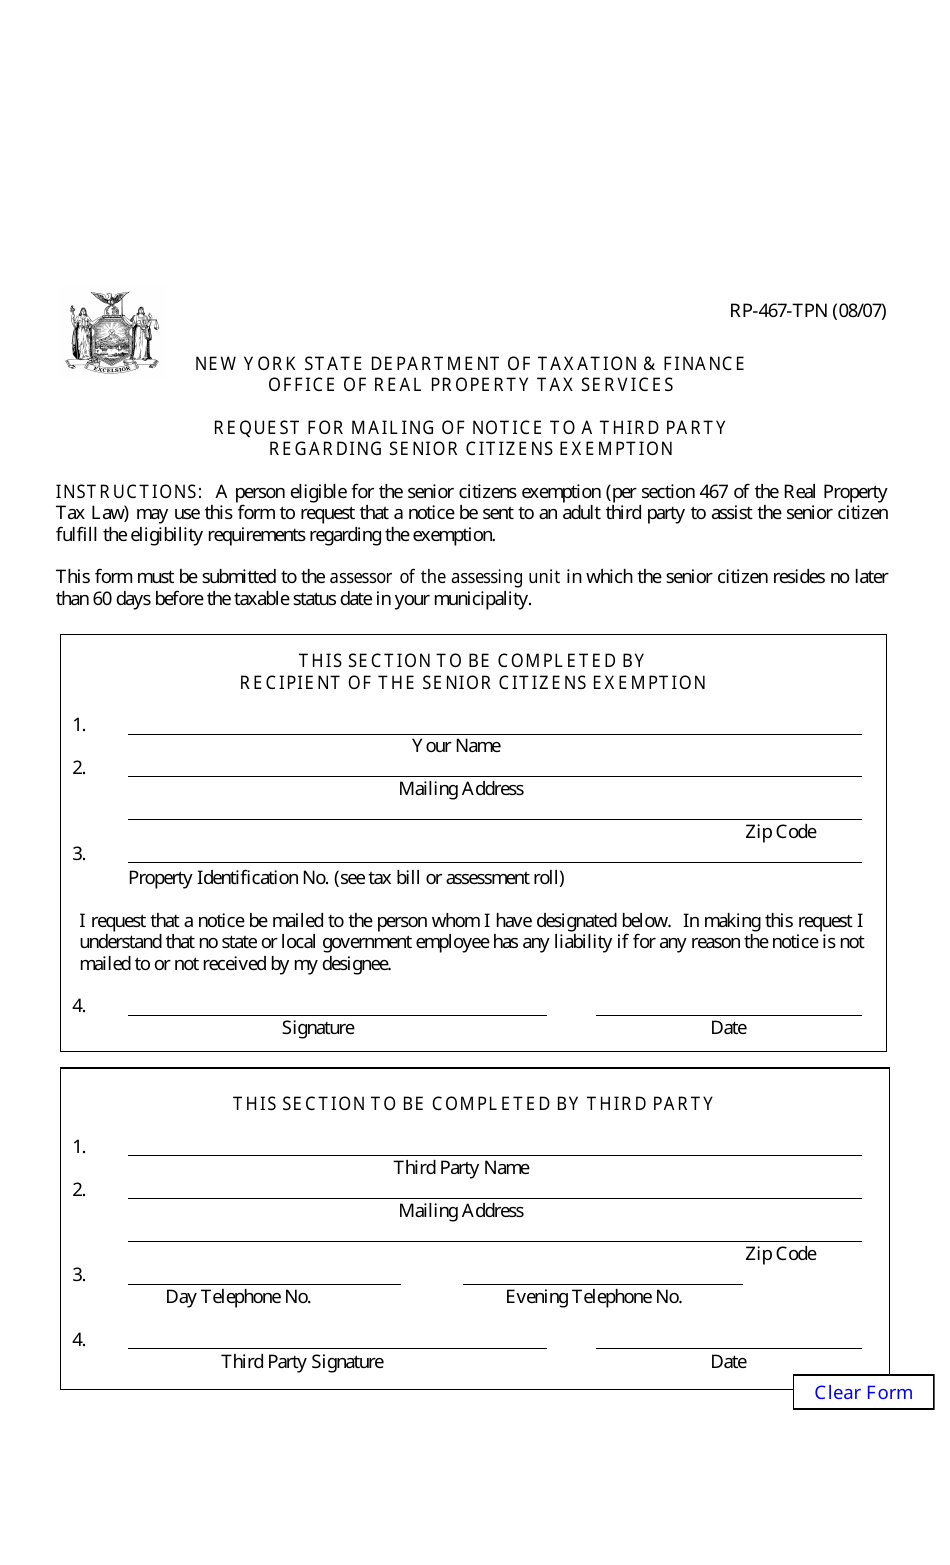 Form RP-467-TPN Request for Mailing of Notice to a Third Party Regarding Senior Citizens Exemption - New York, Page 1